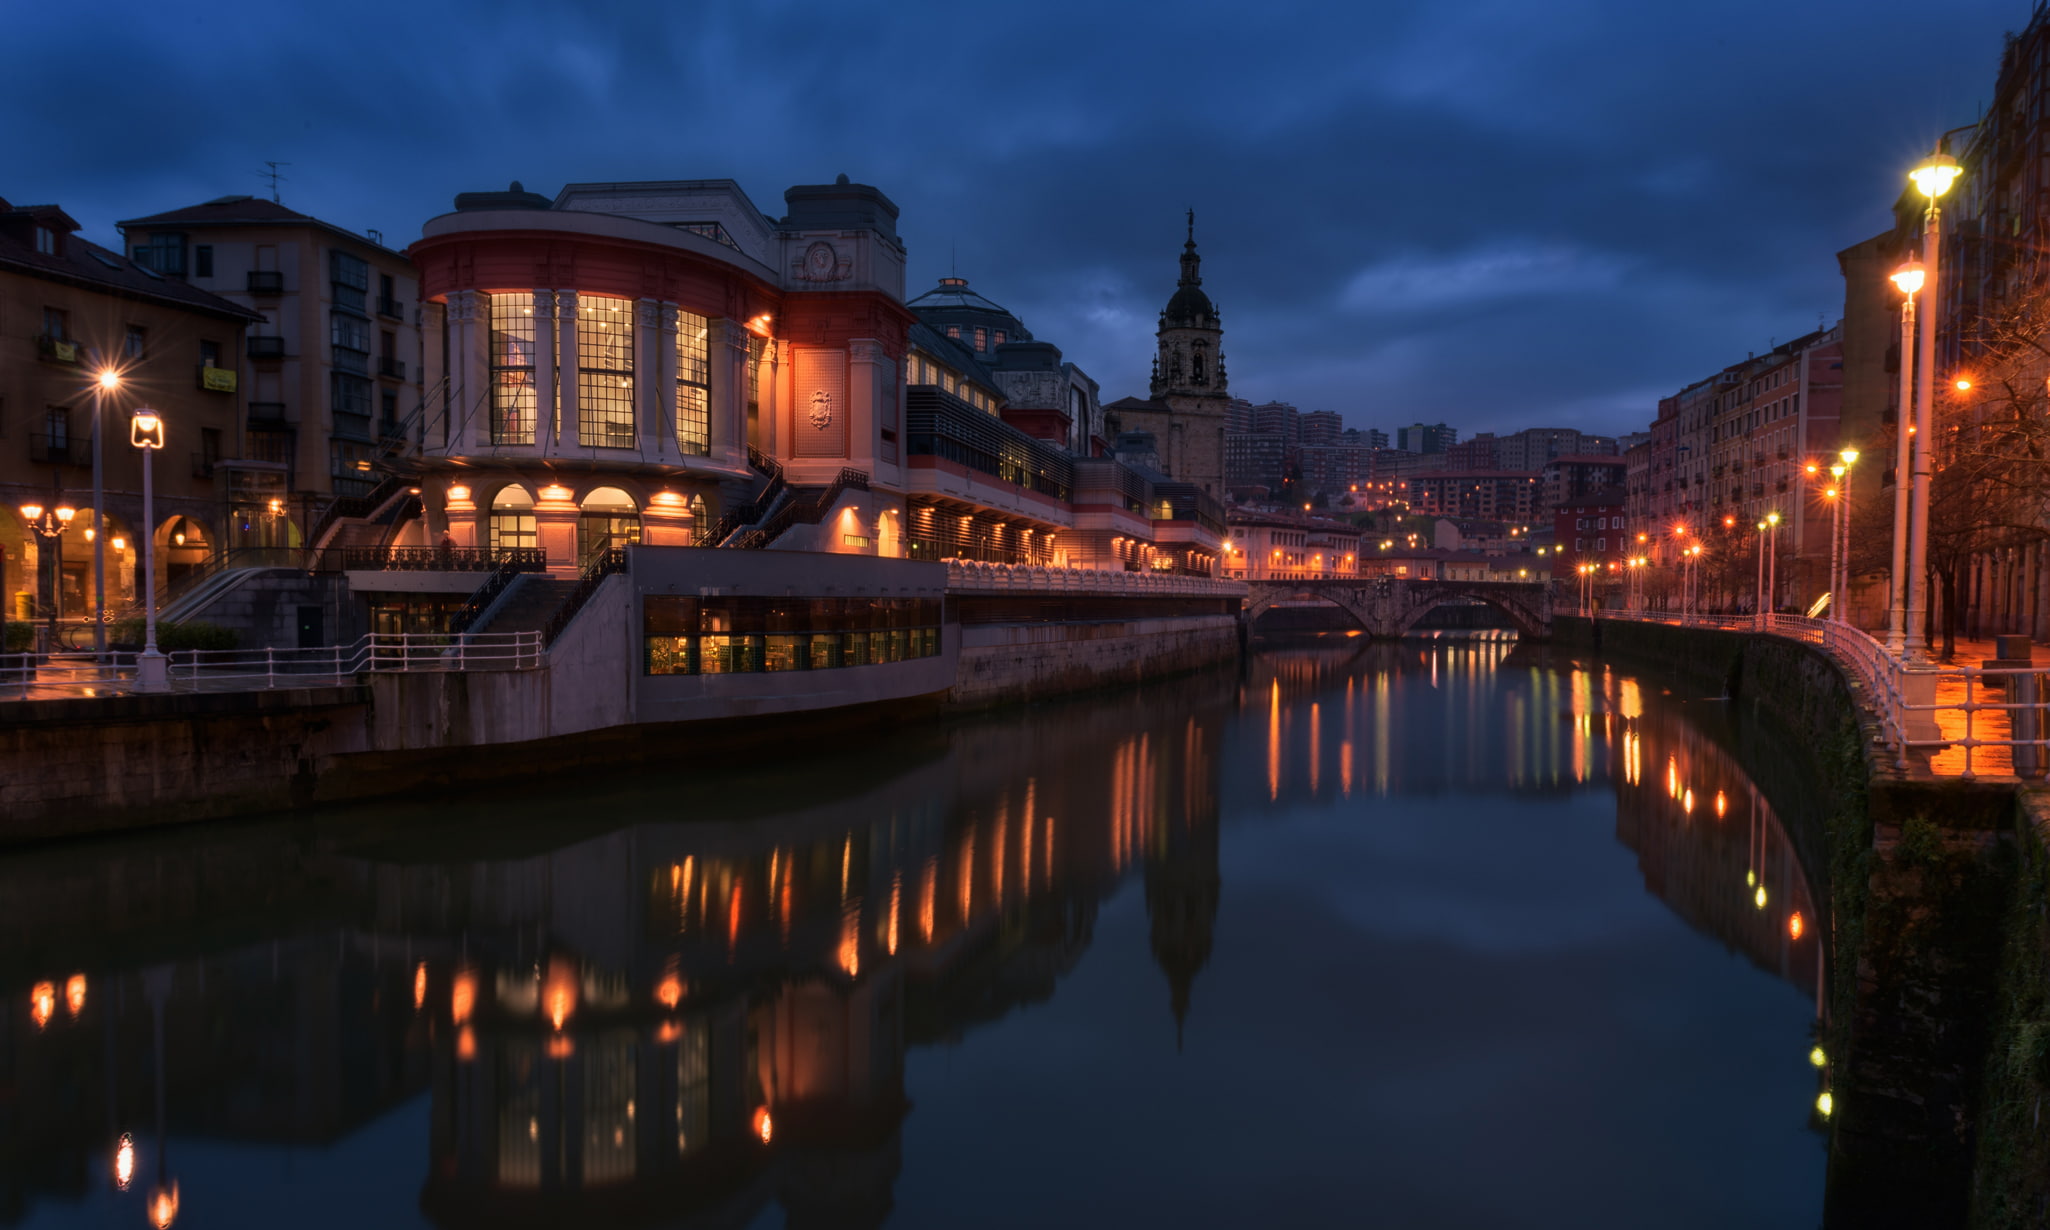 Cities, City, Architecture, Bilbao, Canal, House, Night, Reflection